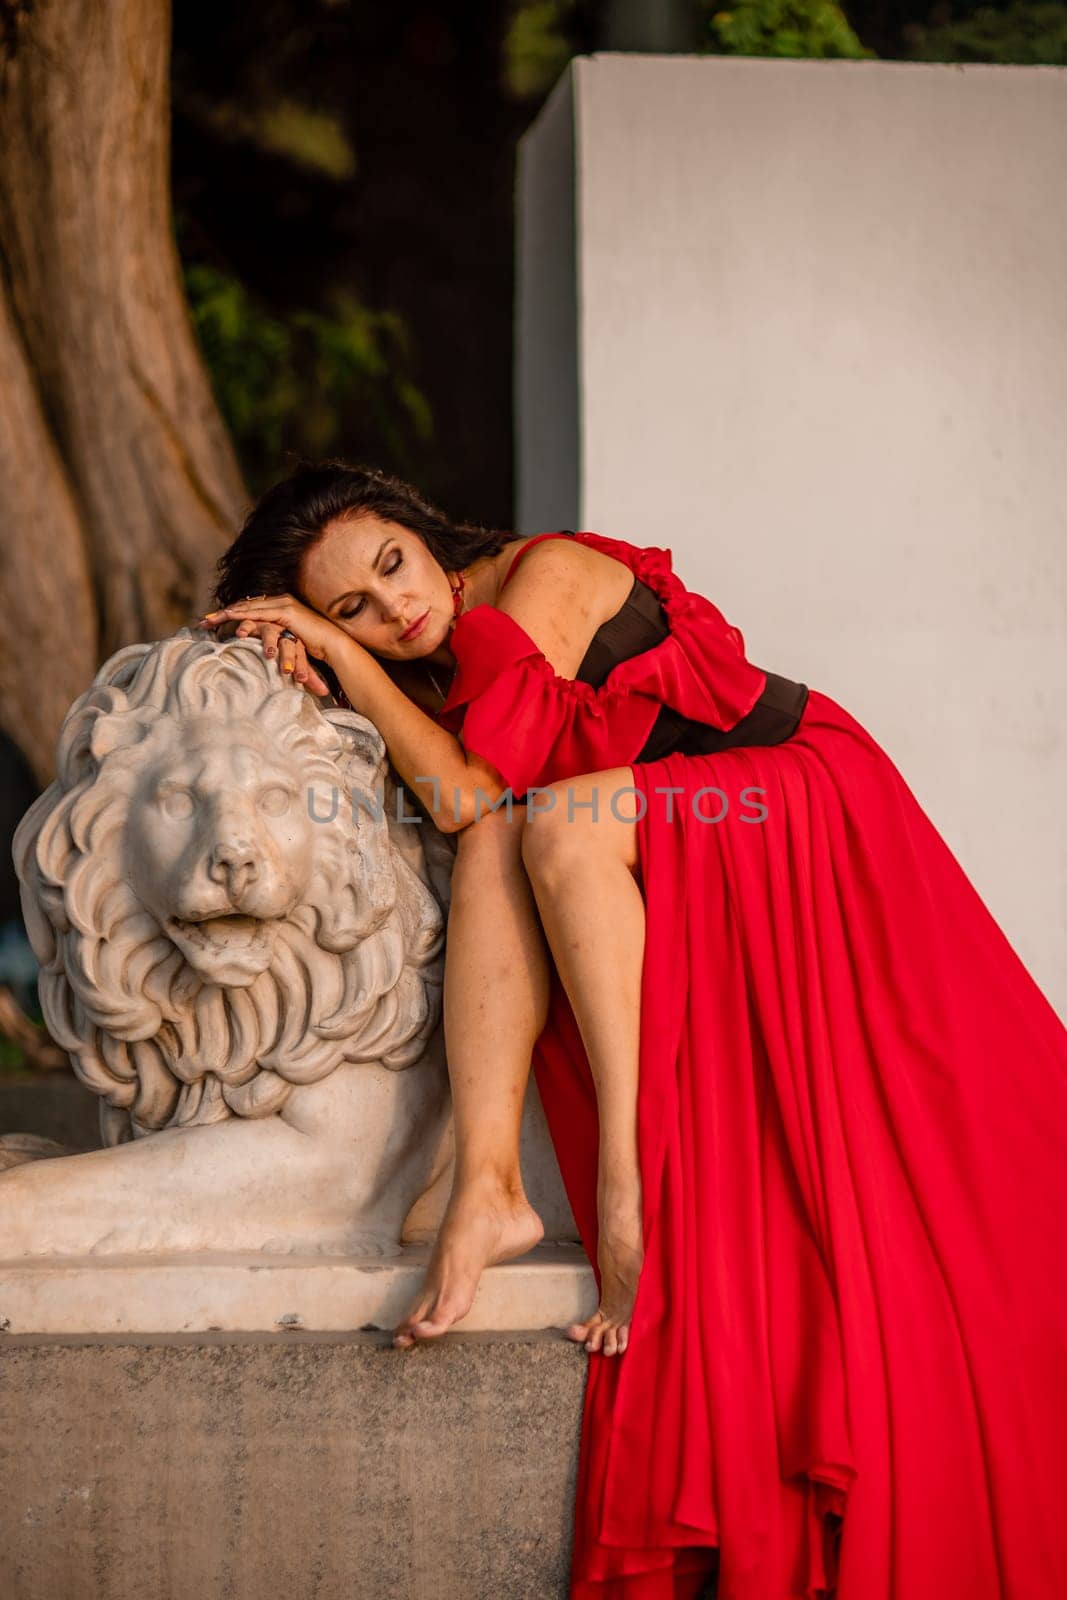 A woman in a red dress is sitting on a stone lion statue. The statue is white and has a lion's head. The woman is wearing a black belt and is looking at the camera. The scene has a calm. by Matiunina